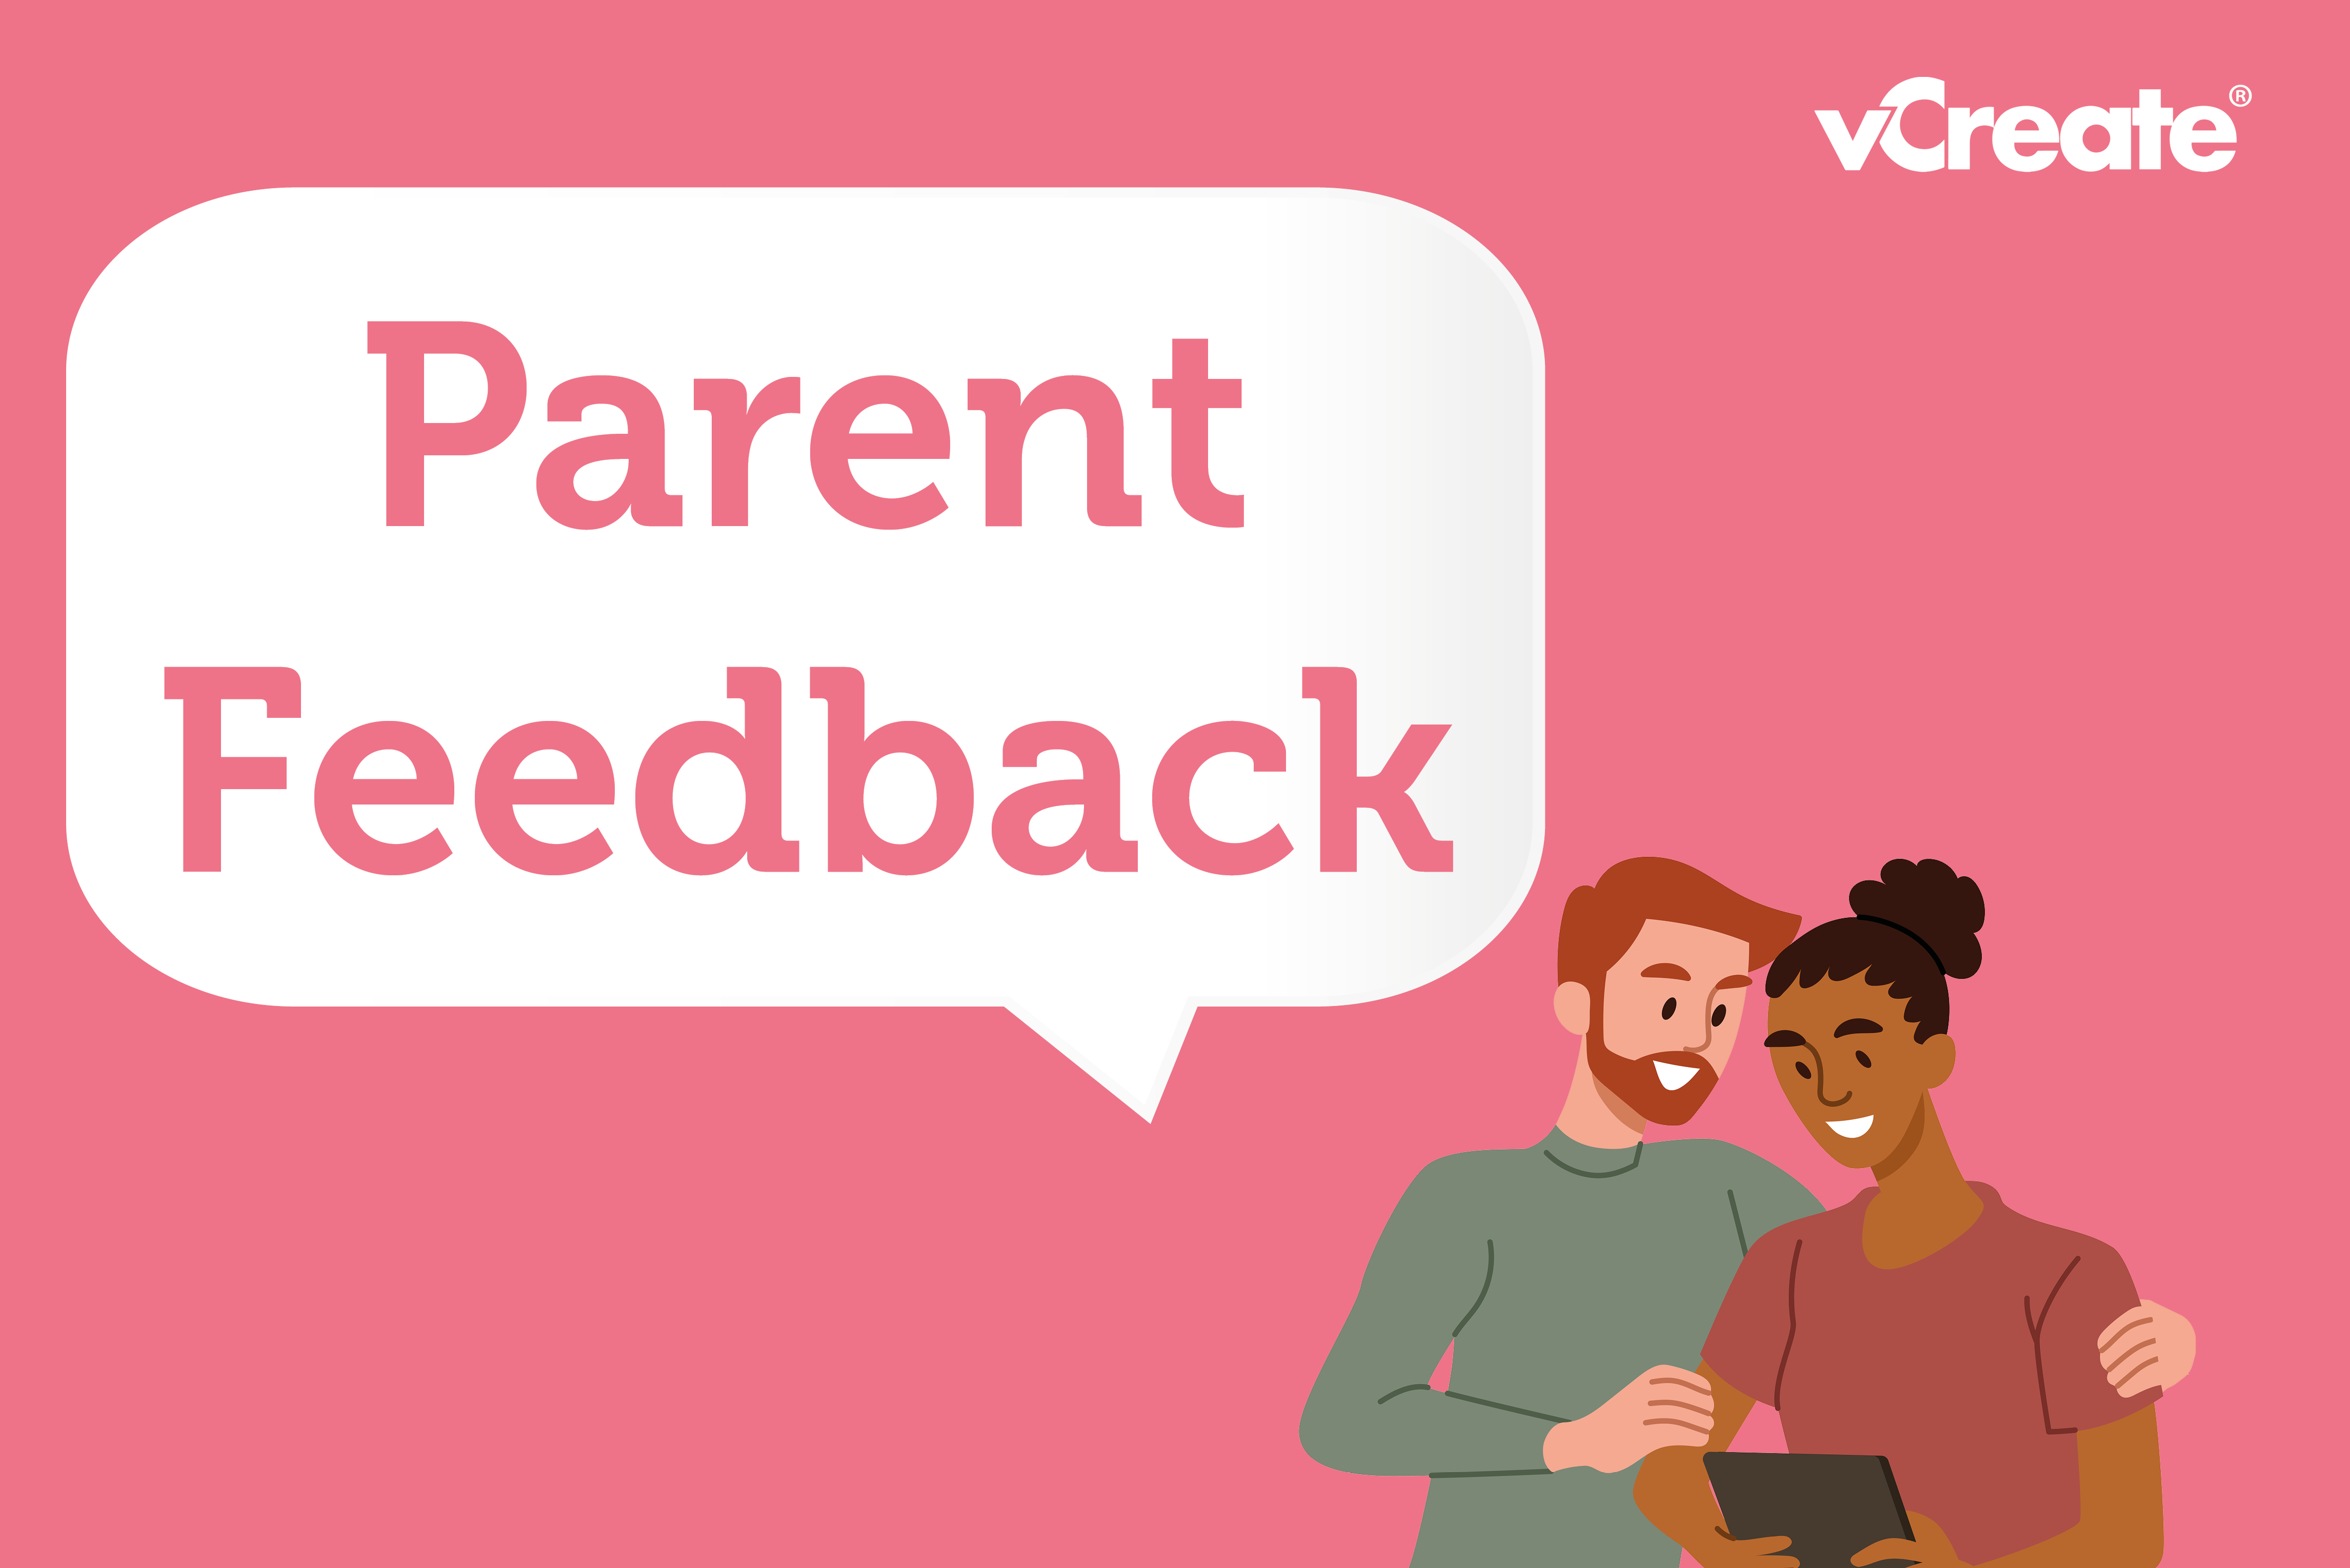 Parent feedback on the benefits of vCreate